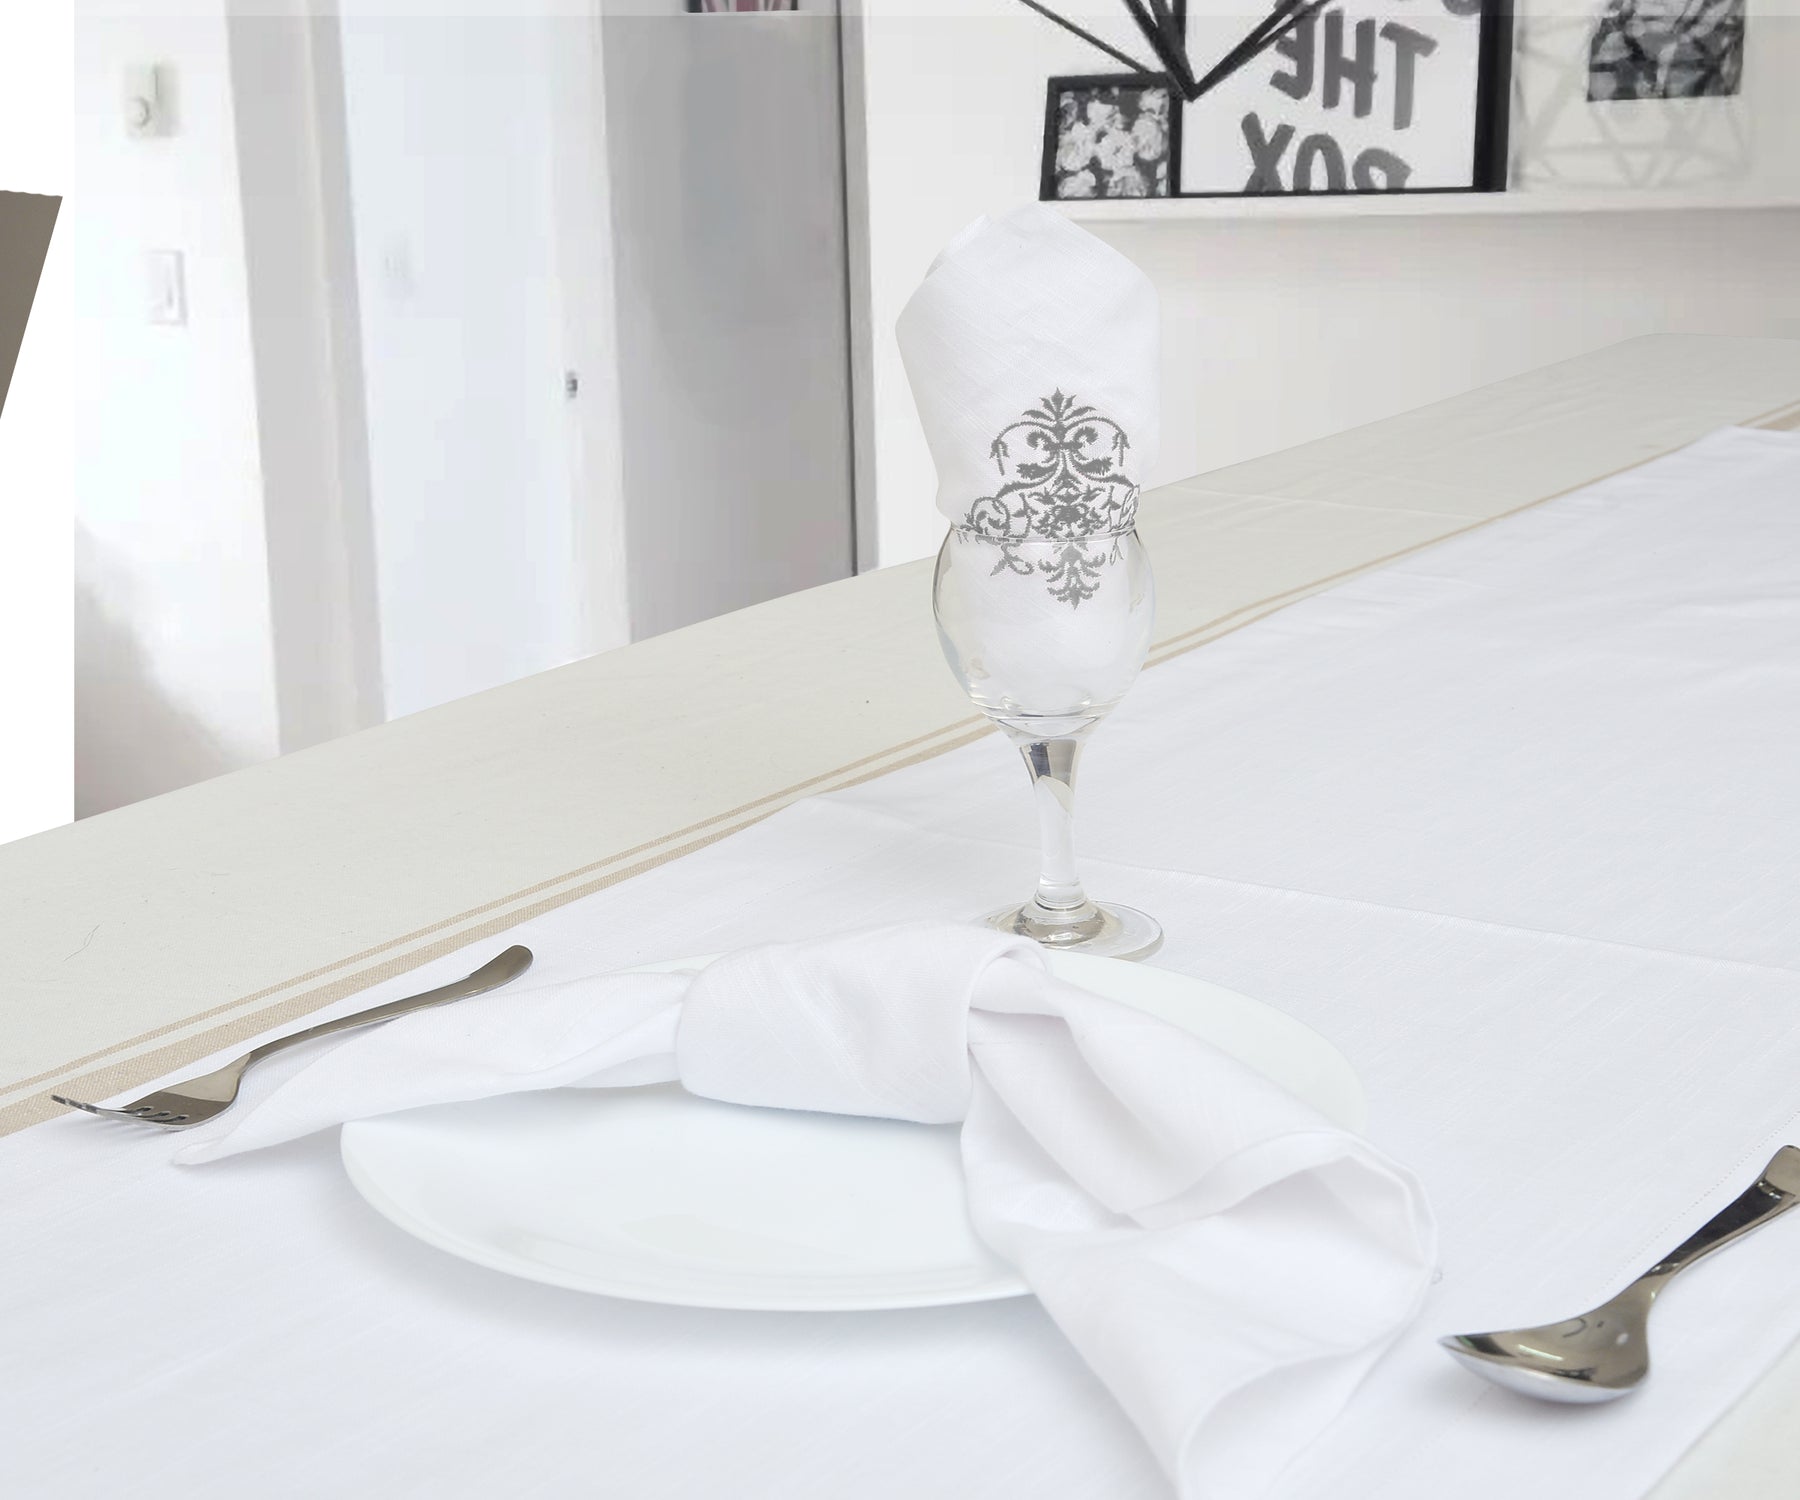 white and embroidery gray table runner are 100% cotton fabric, easter table runner.